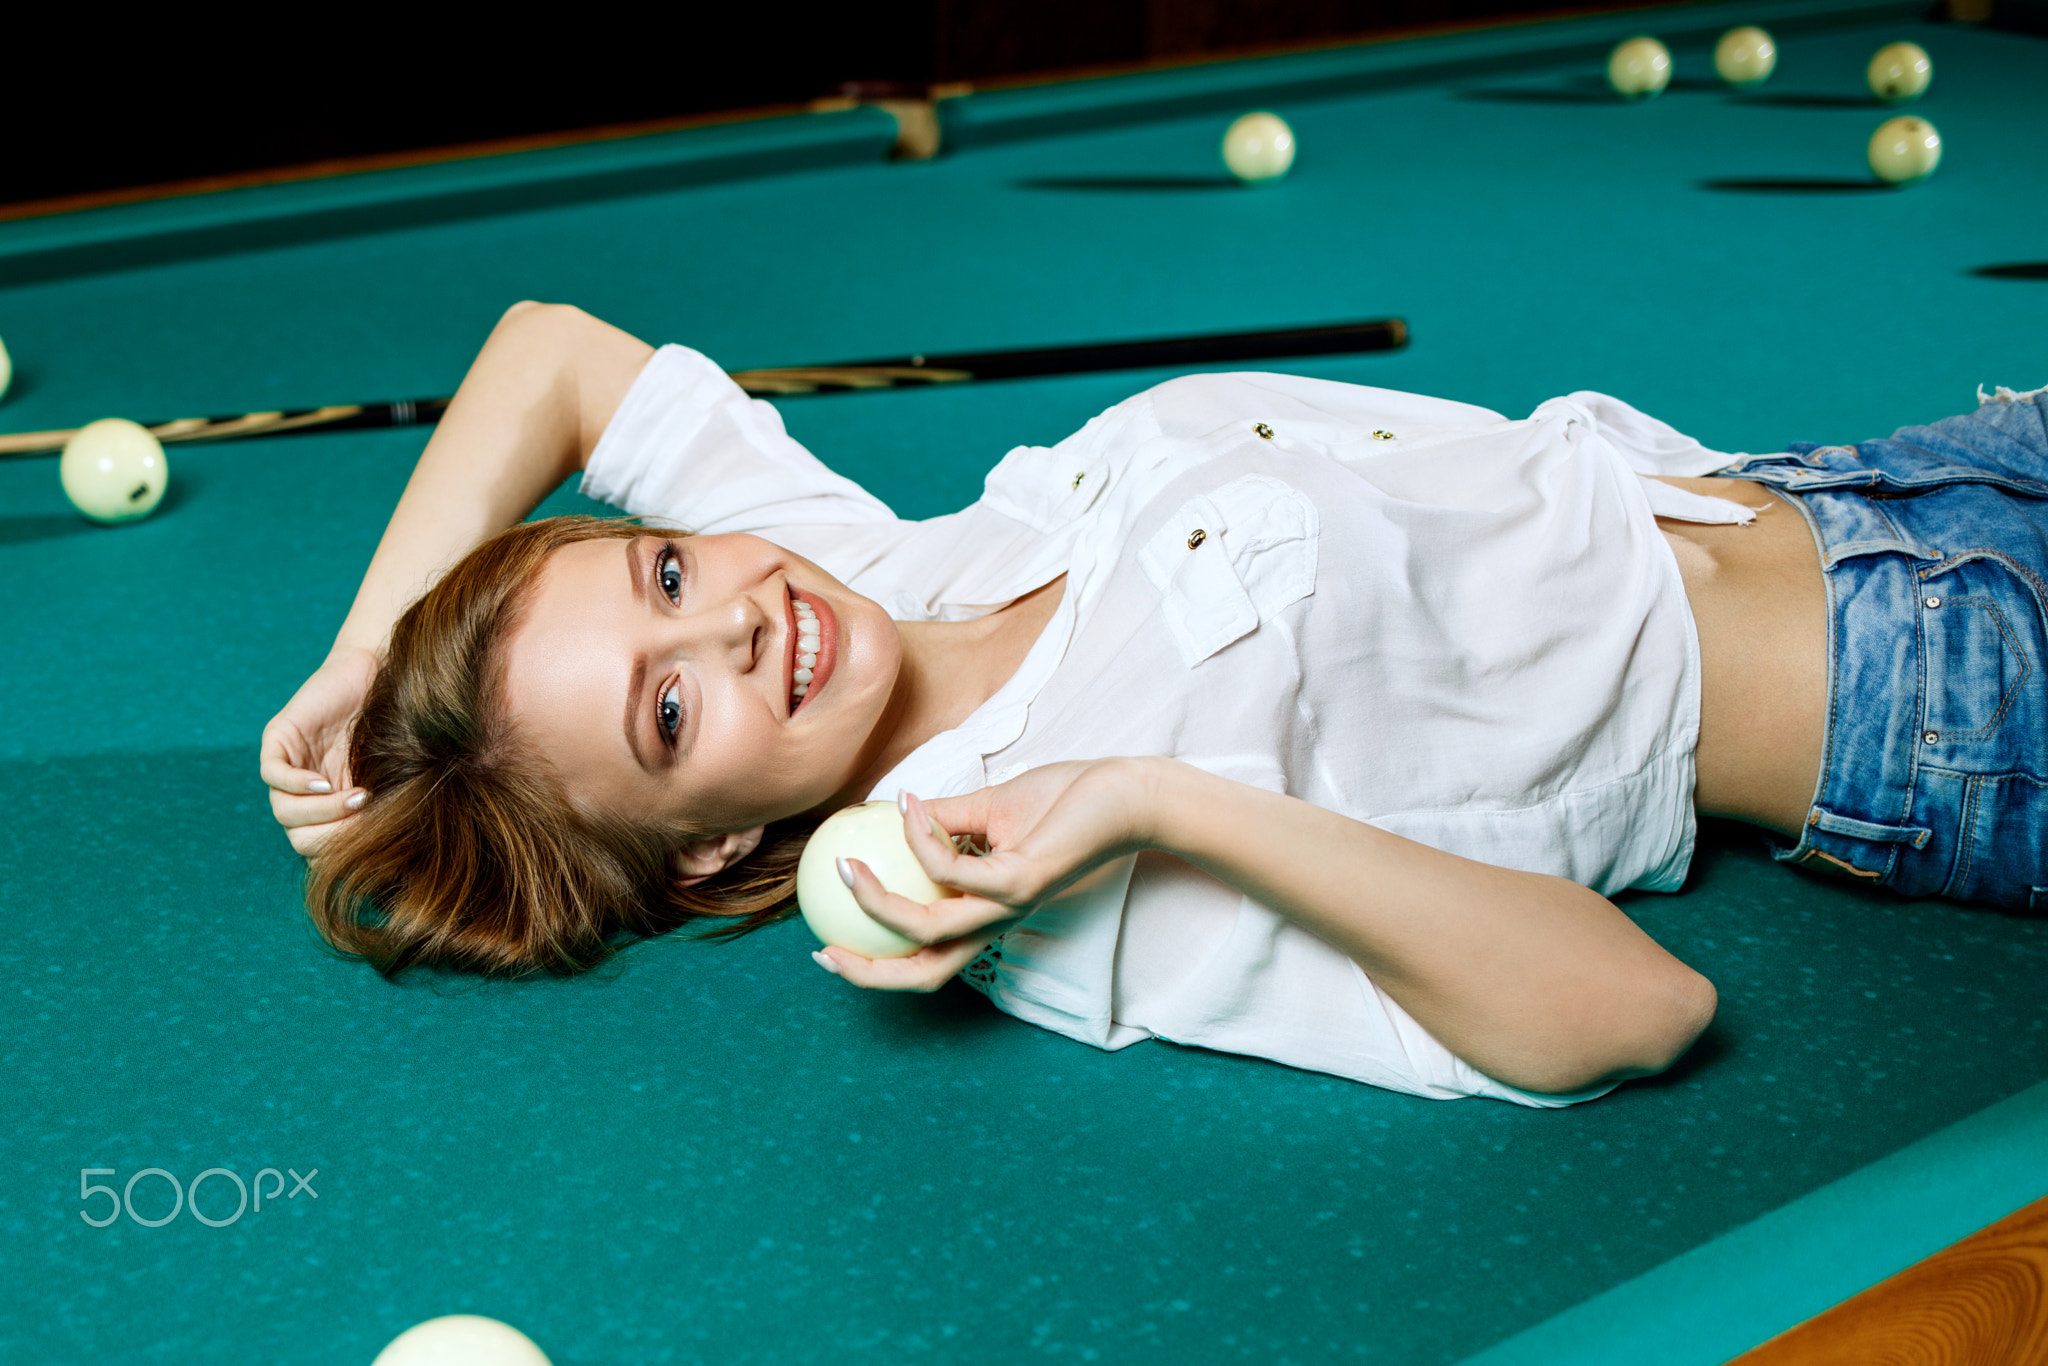 Young woman lying on the billiard table and looking at camera.